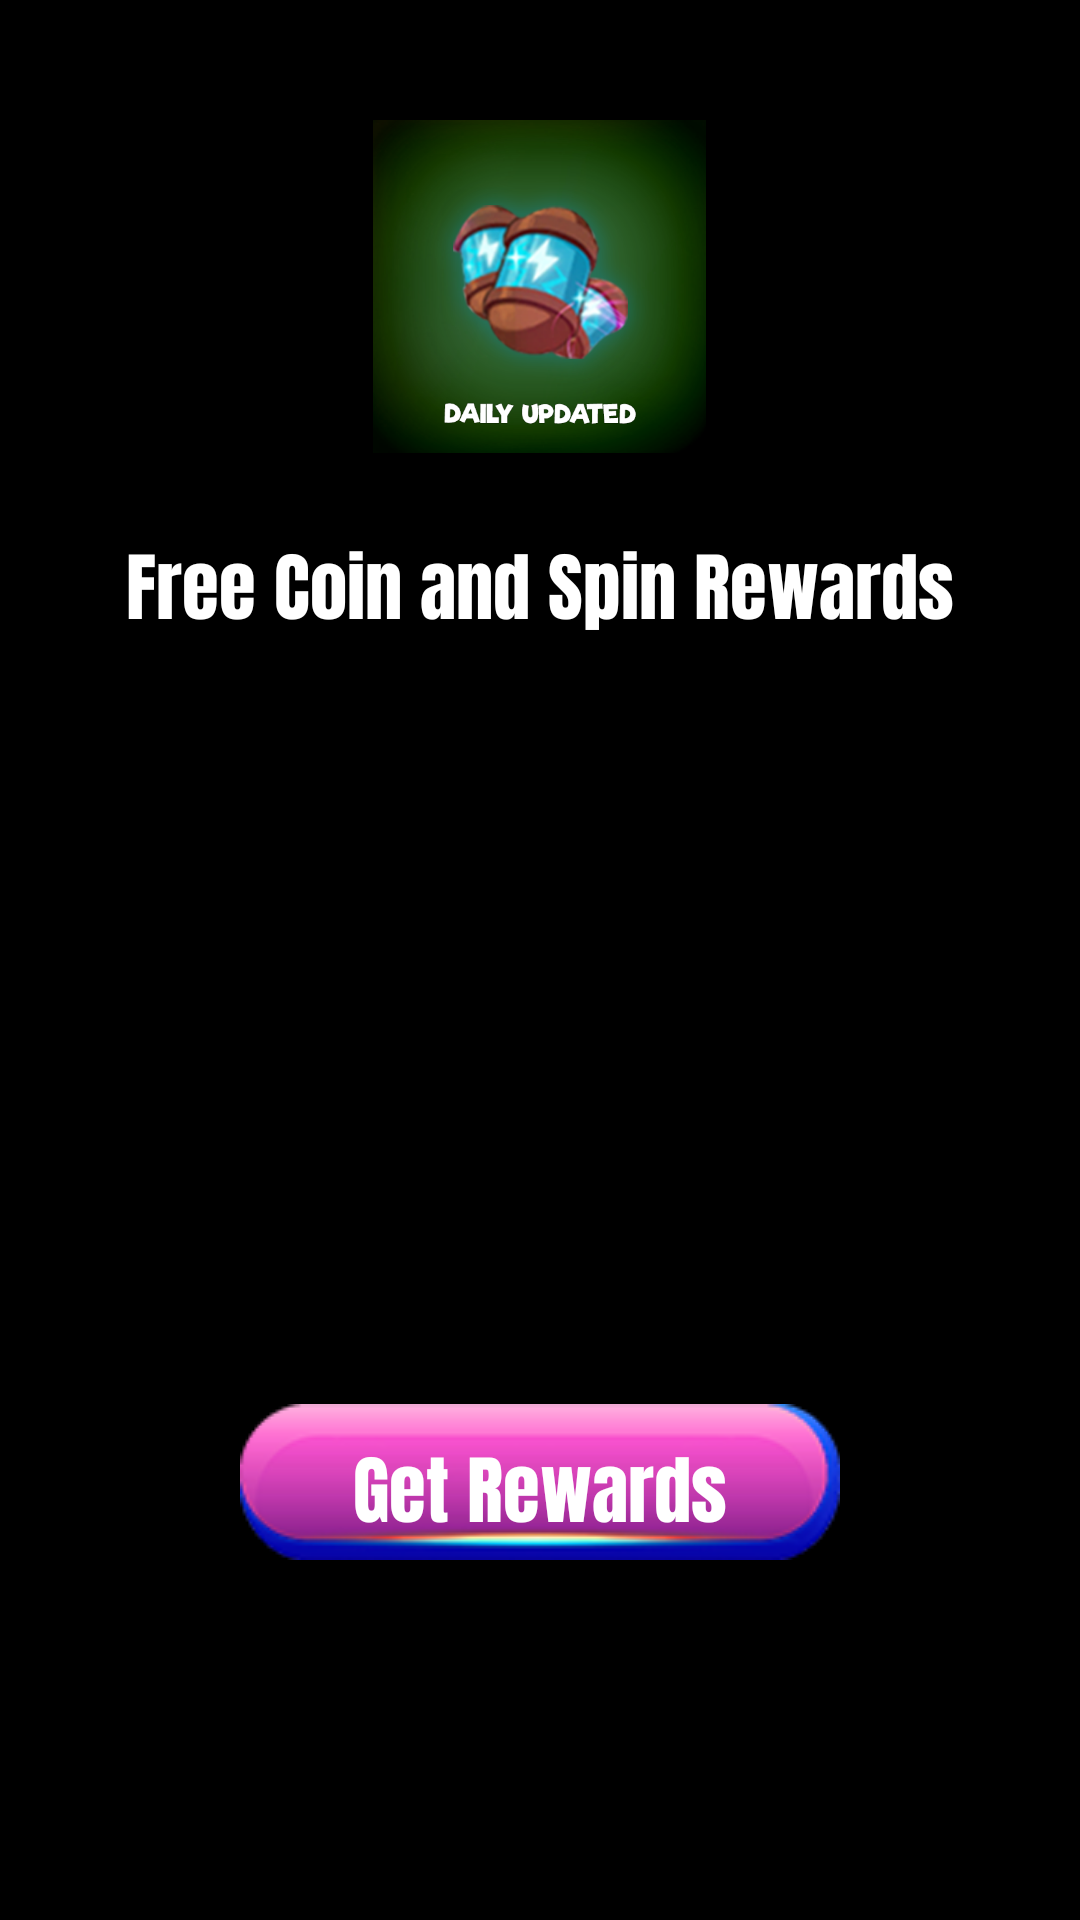 Screenshot 1 of Coin and Spin Rewards 1.0